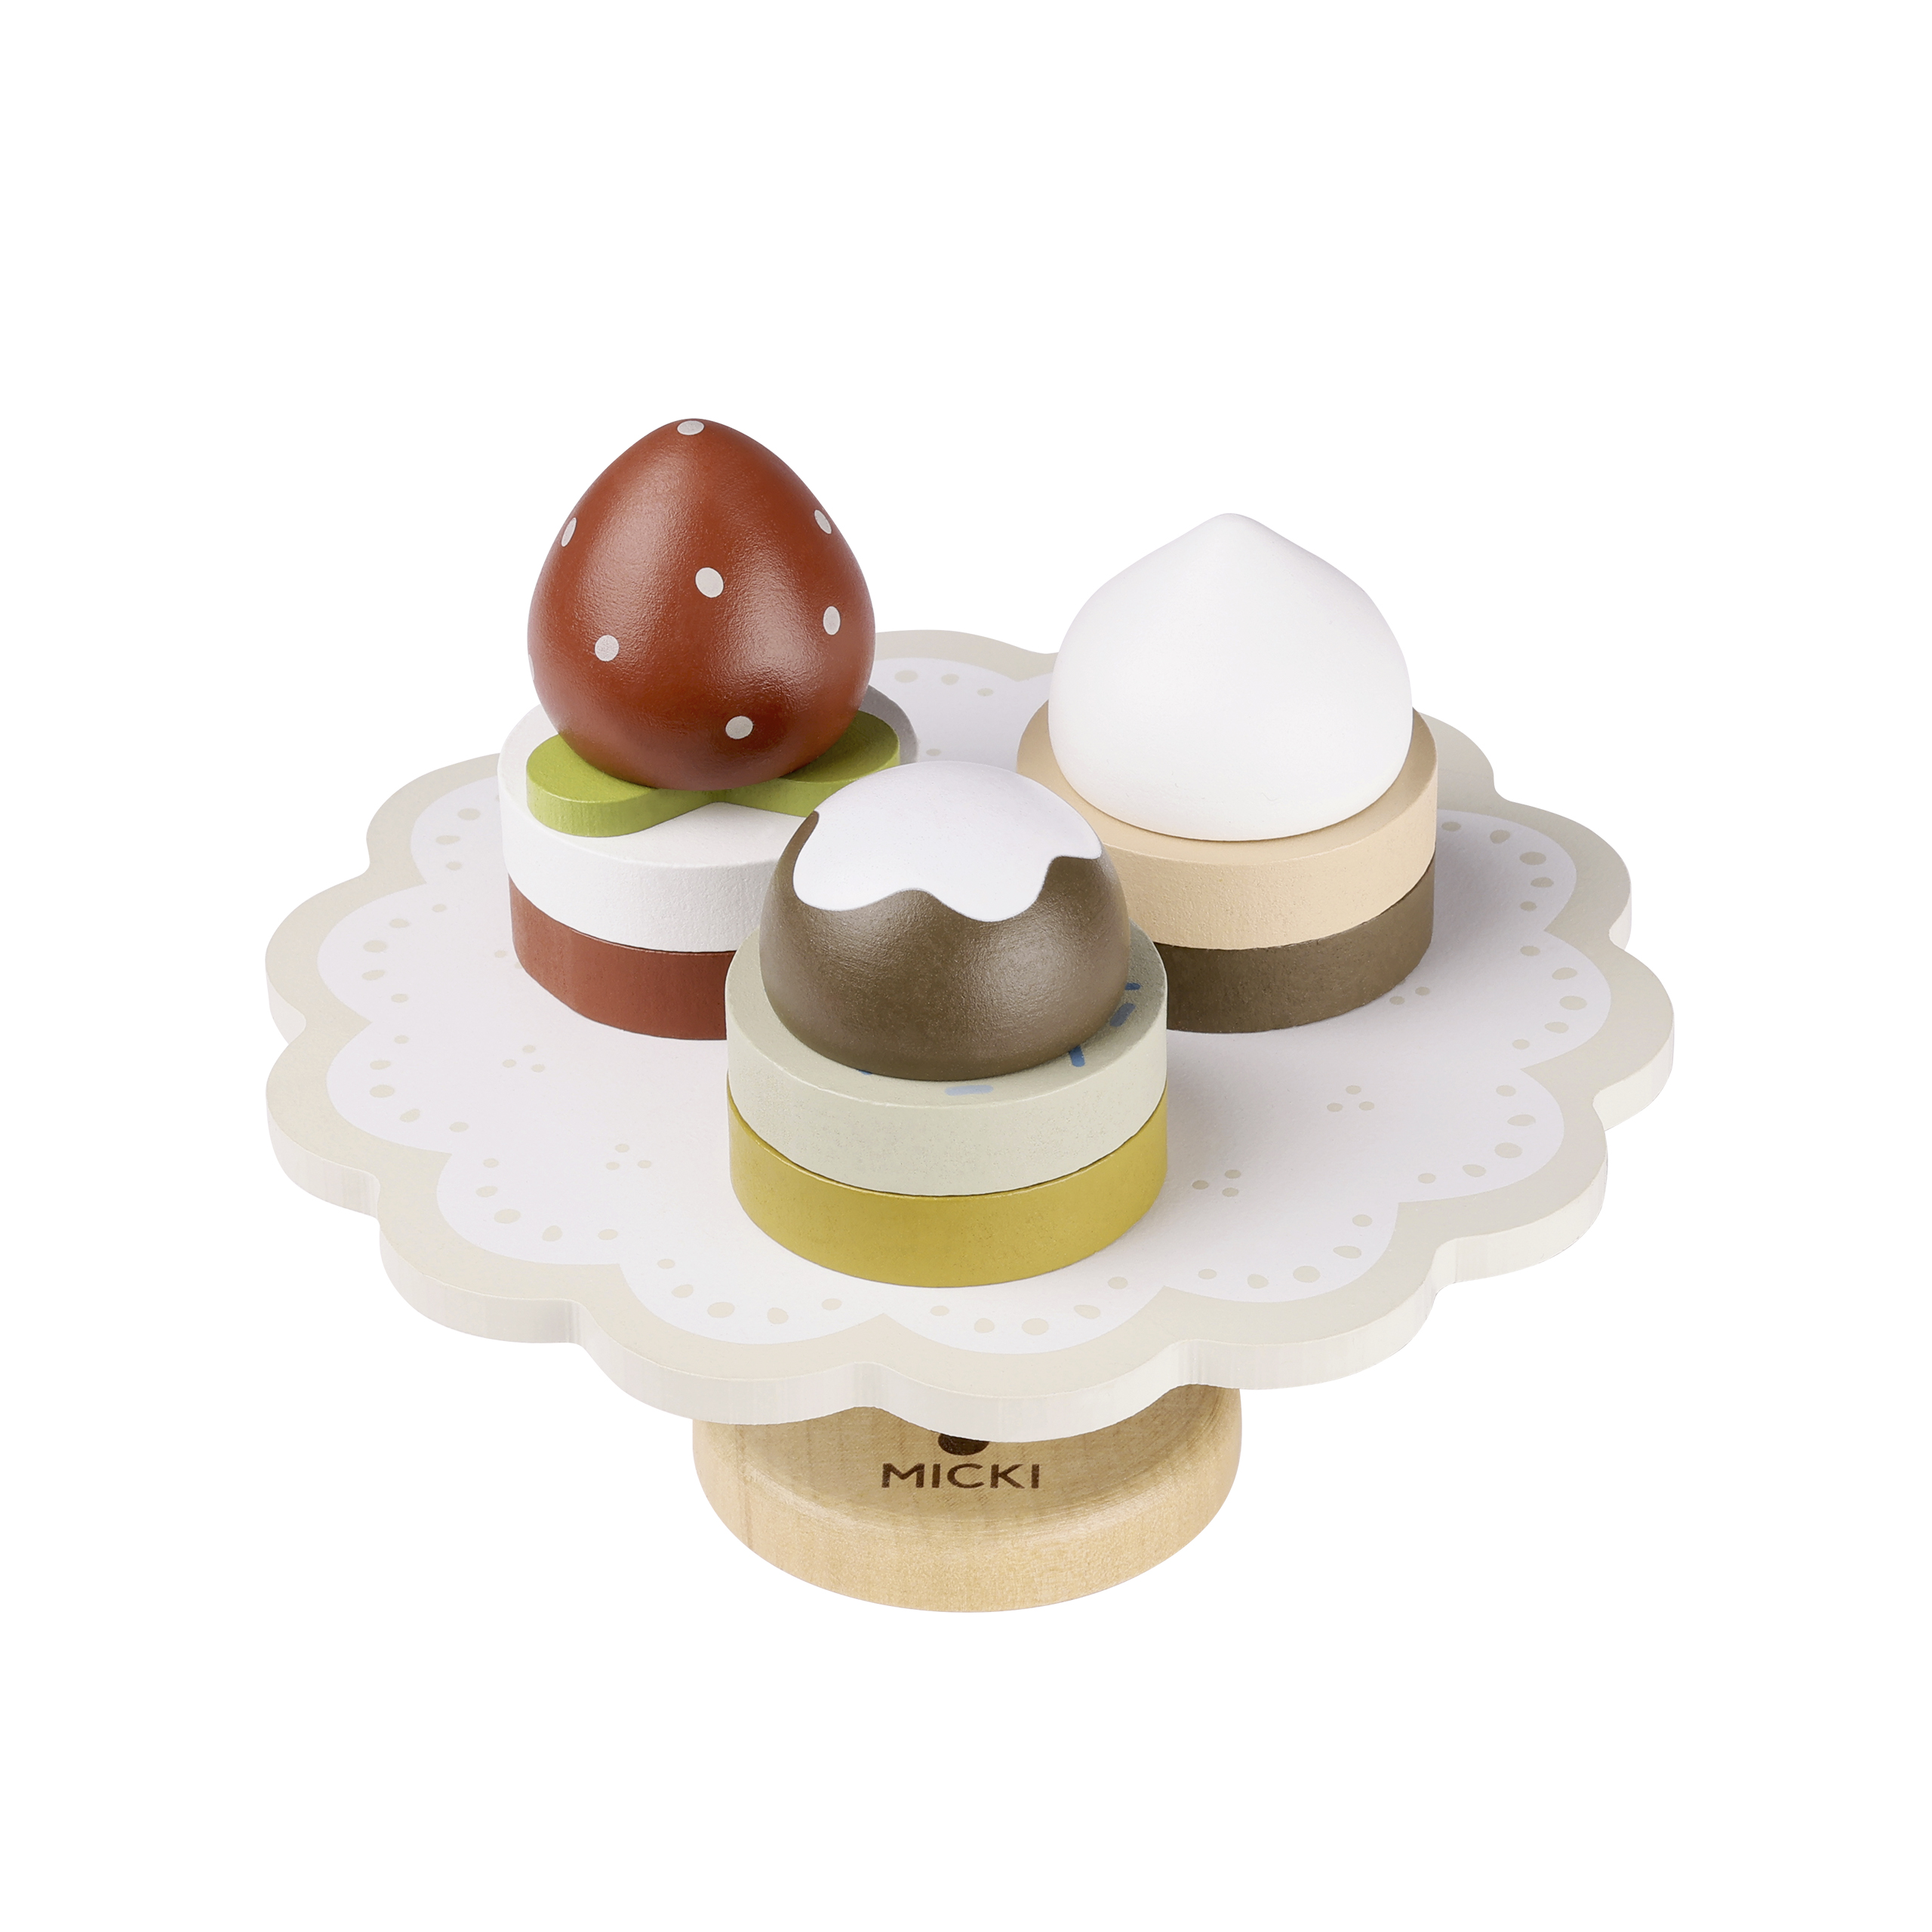 Kids’ costumes micki cake stand with toy pastries